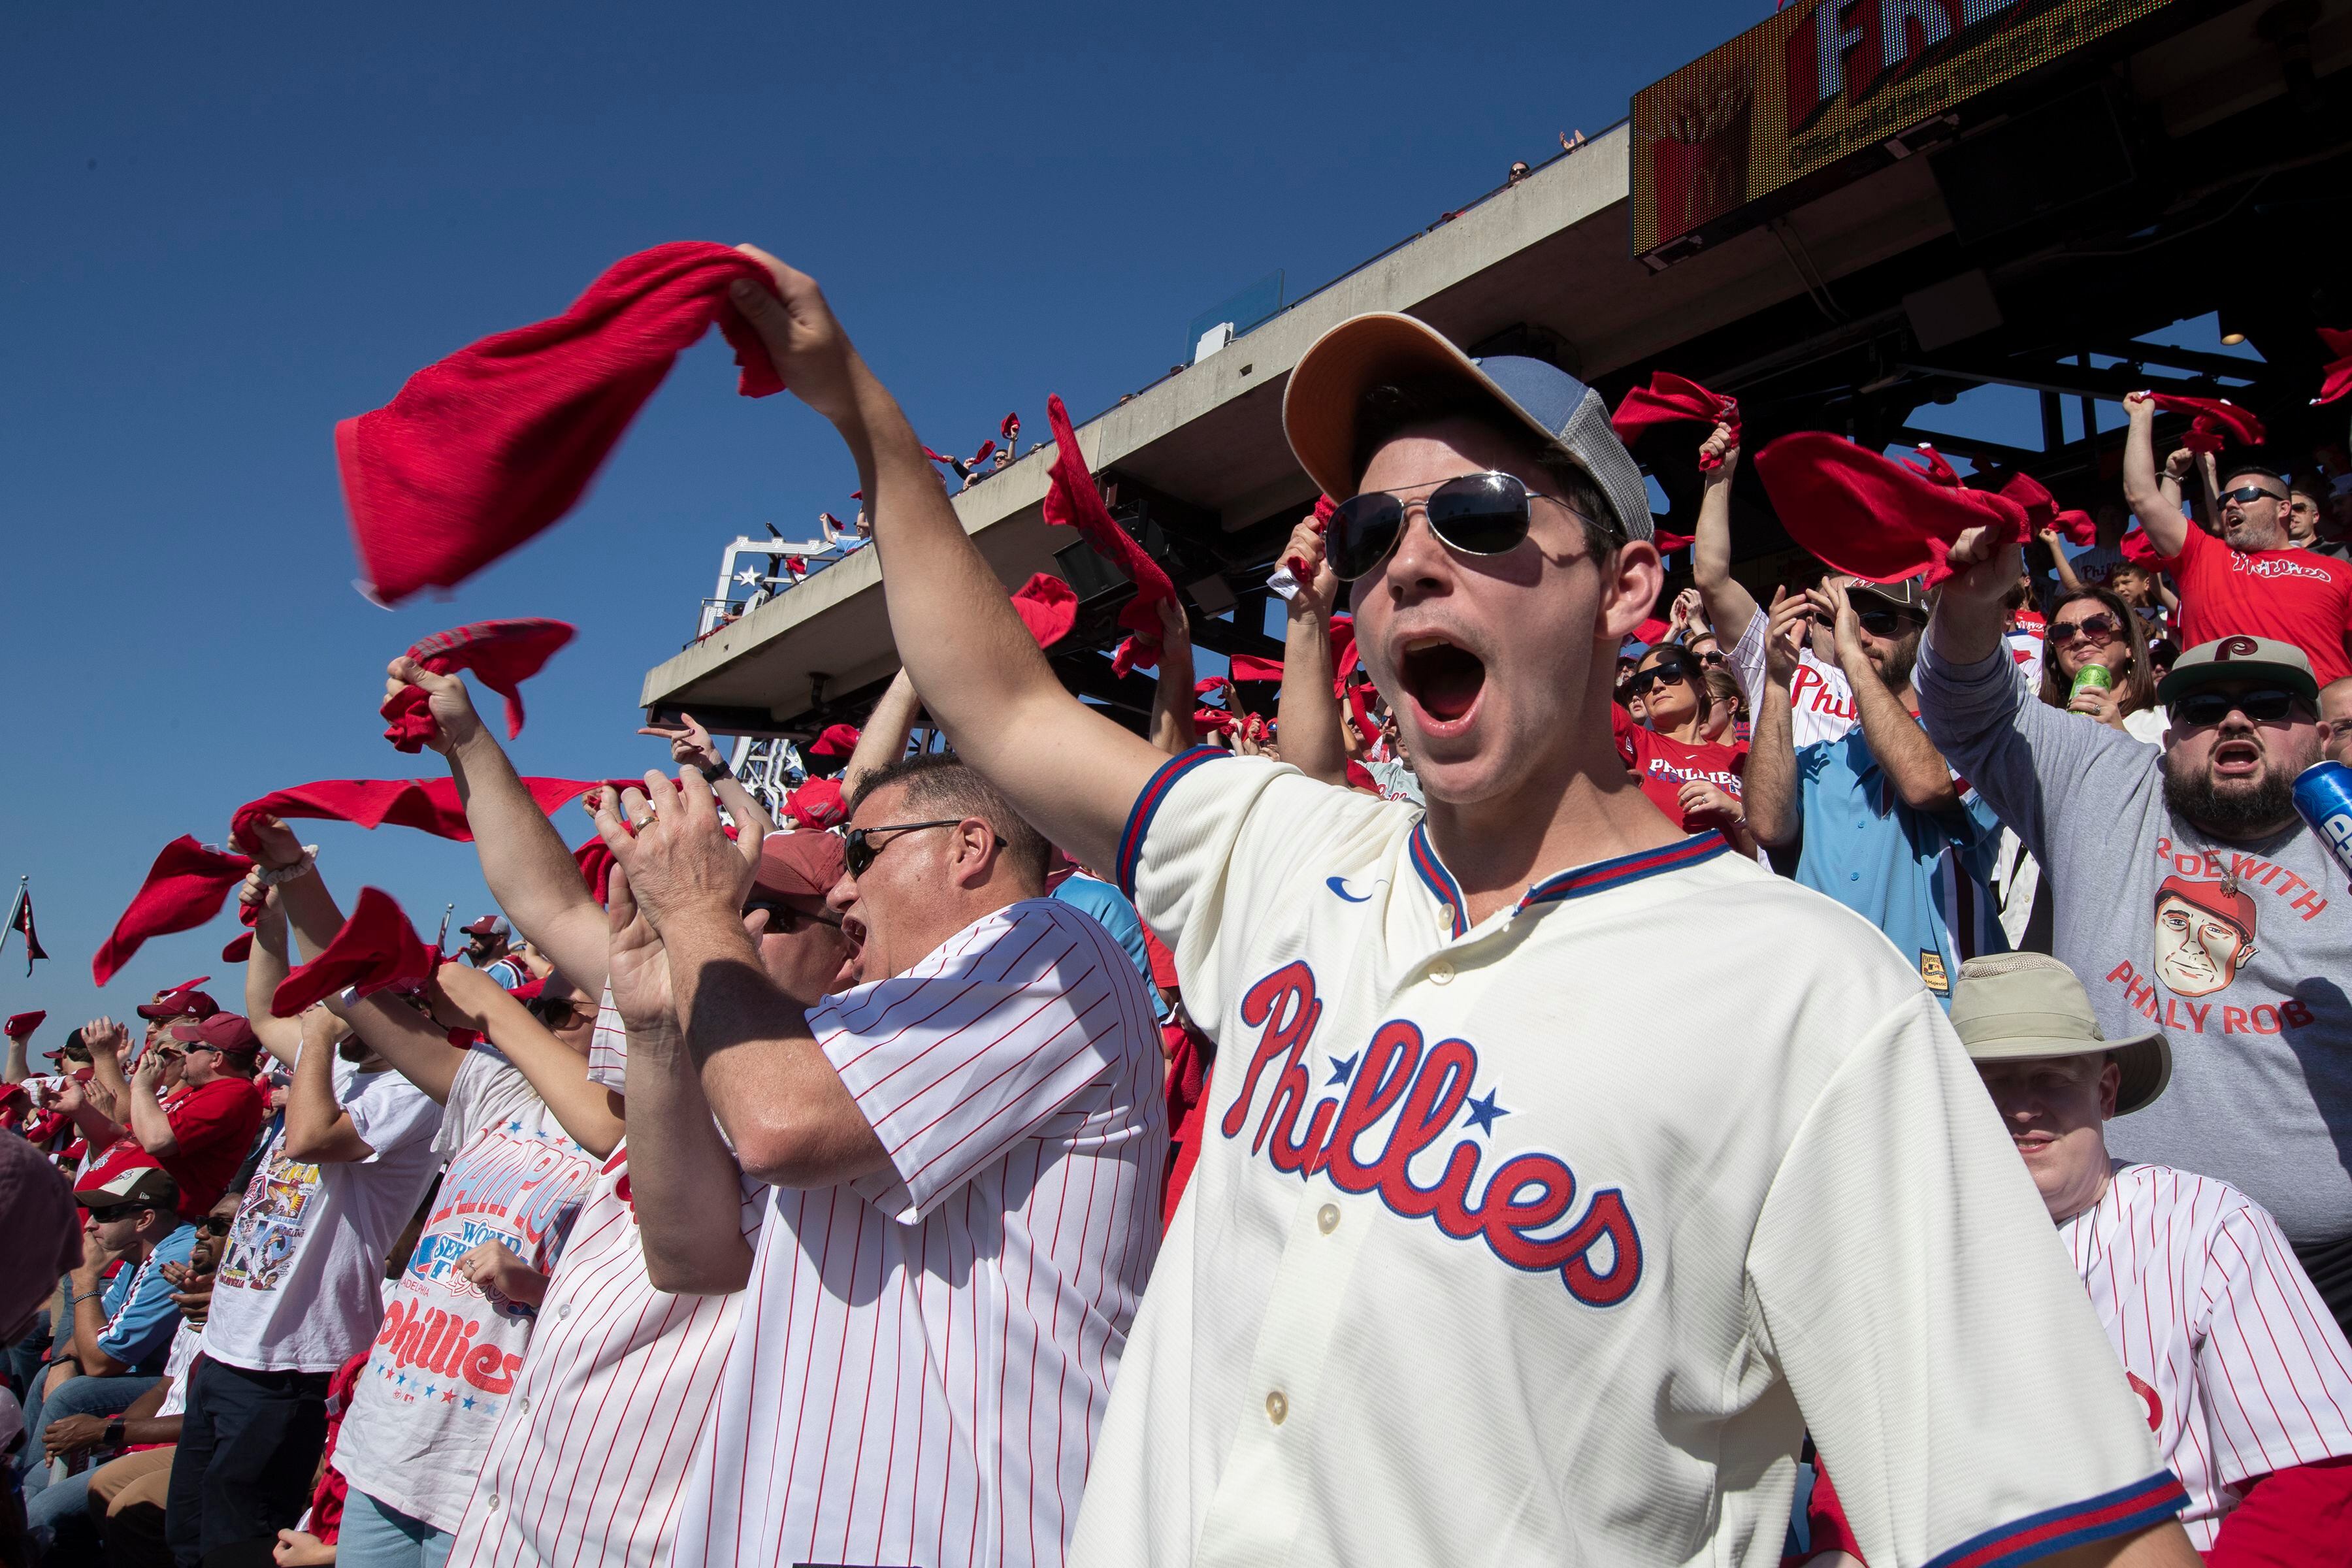 Phillies and Birds treat fans to a day of victory – Delco Times